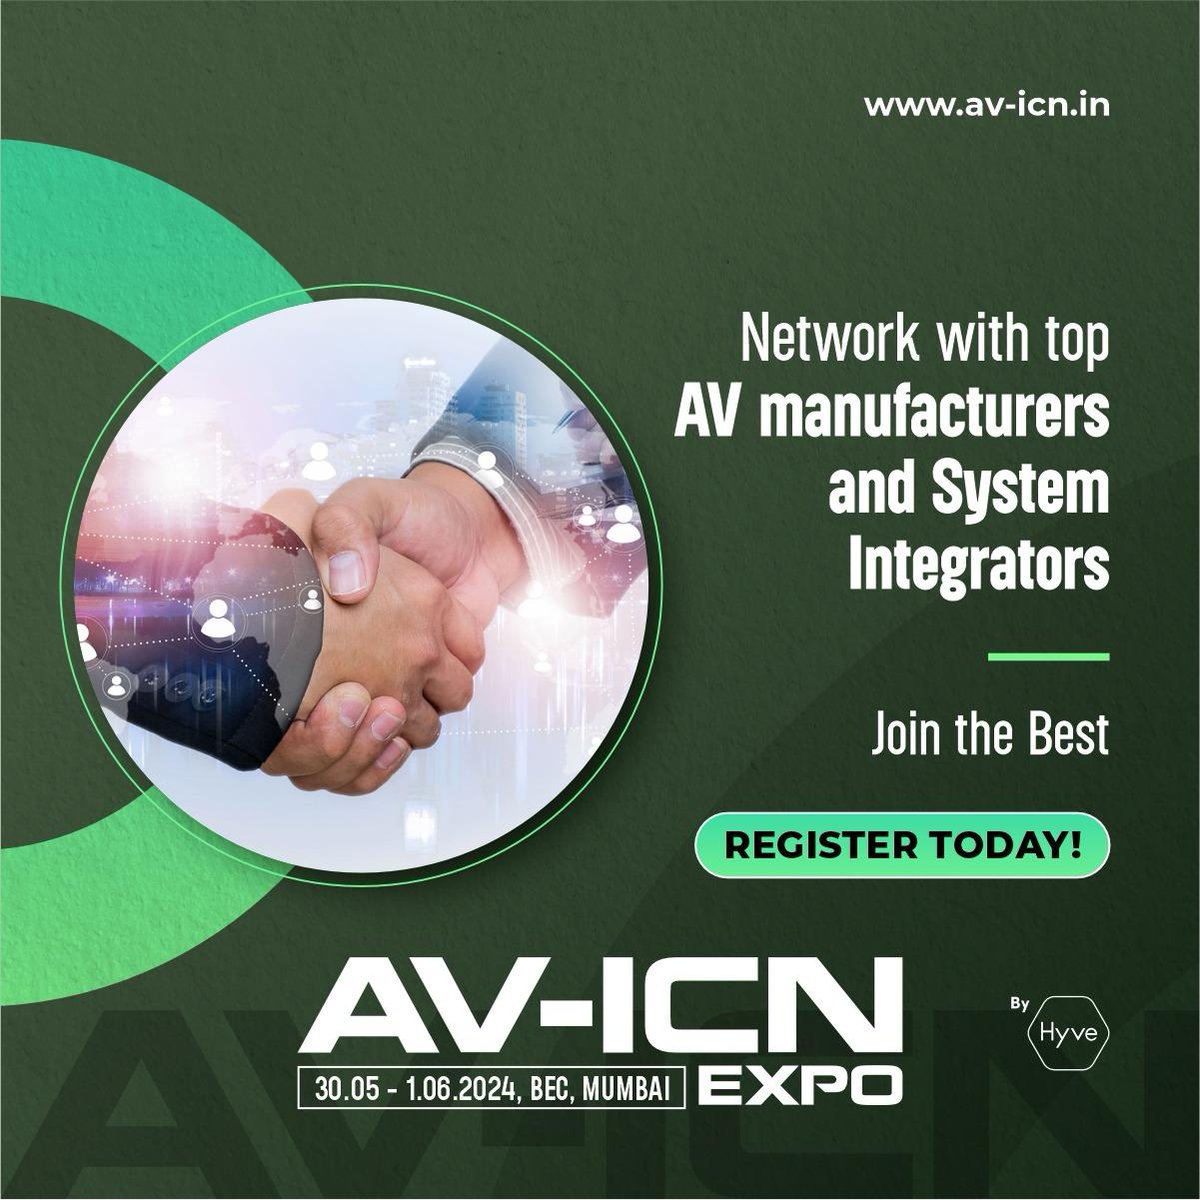 🤝 Forge valuable connections at AV-ICN Expo 2024!

Register today and be a part of the future of AV technology!

#AVICNExpo2024 #NetworkWithTheBest #AVTechnology #SystemIntegrators #MumbaiEvents #TechNetworking #RegisterNow